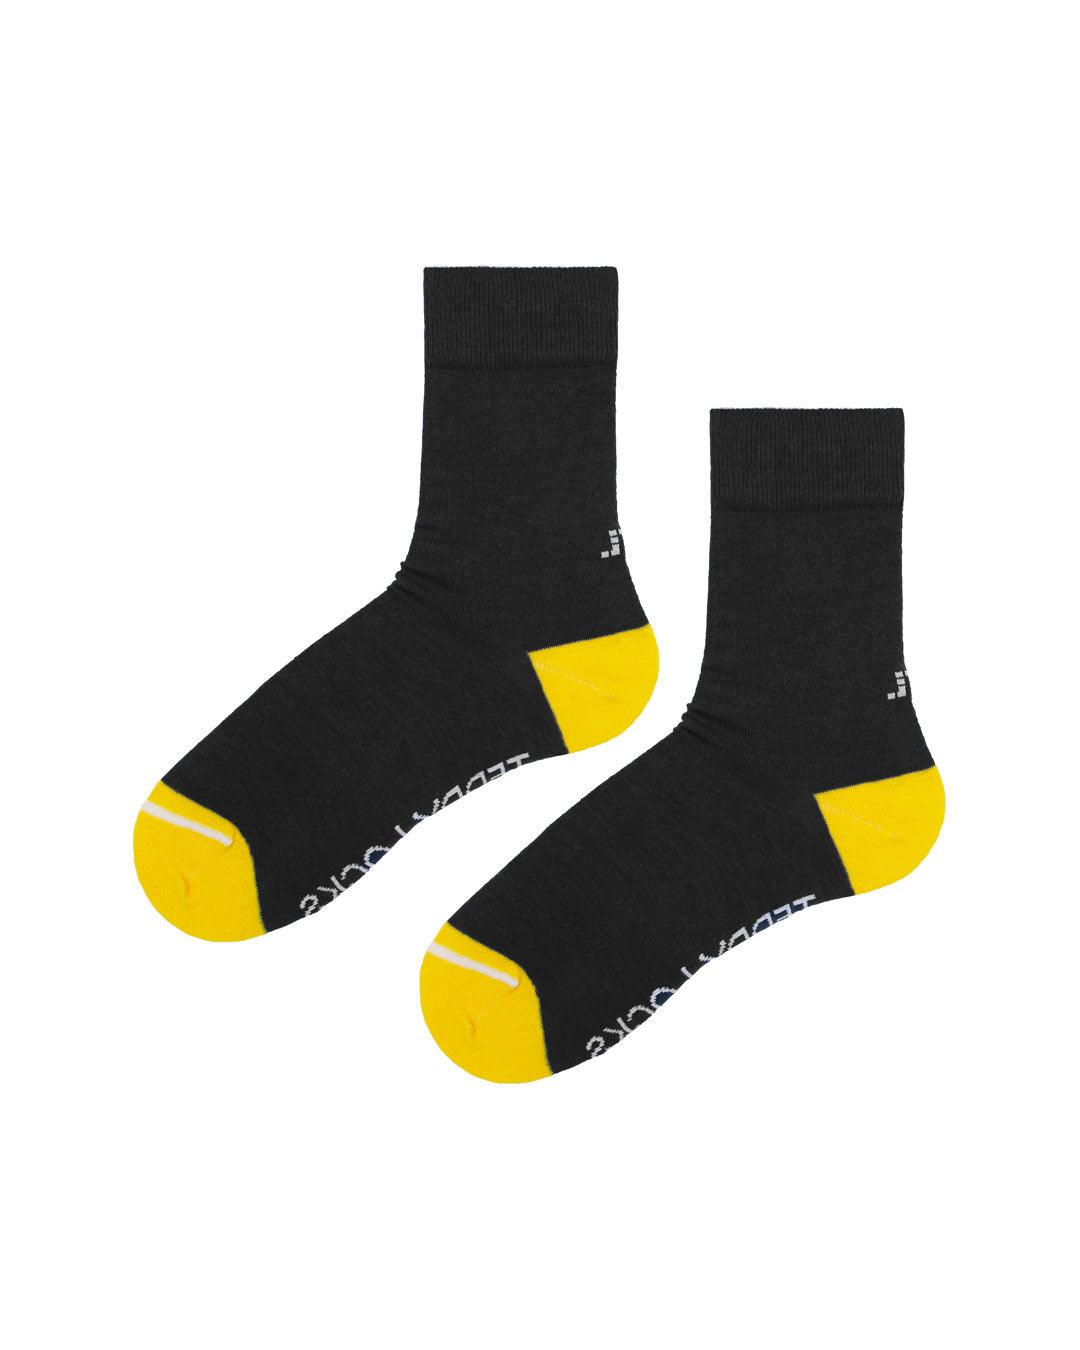 Black and yellow socks for men and women. Ecofriendly socks made in the USA.